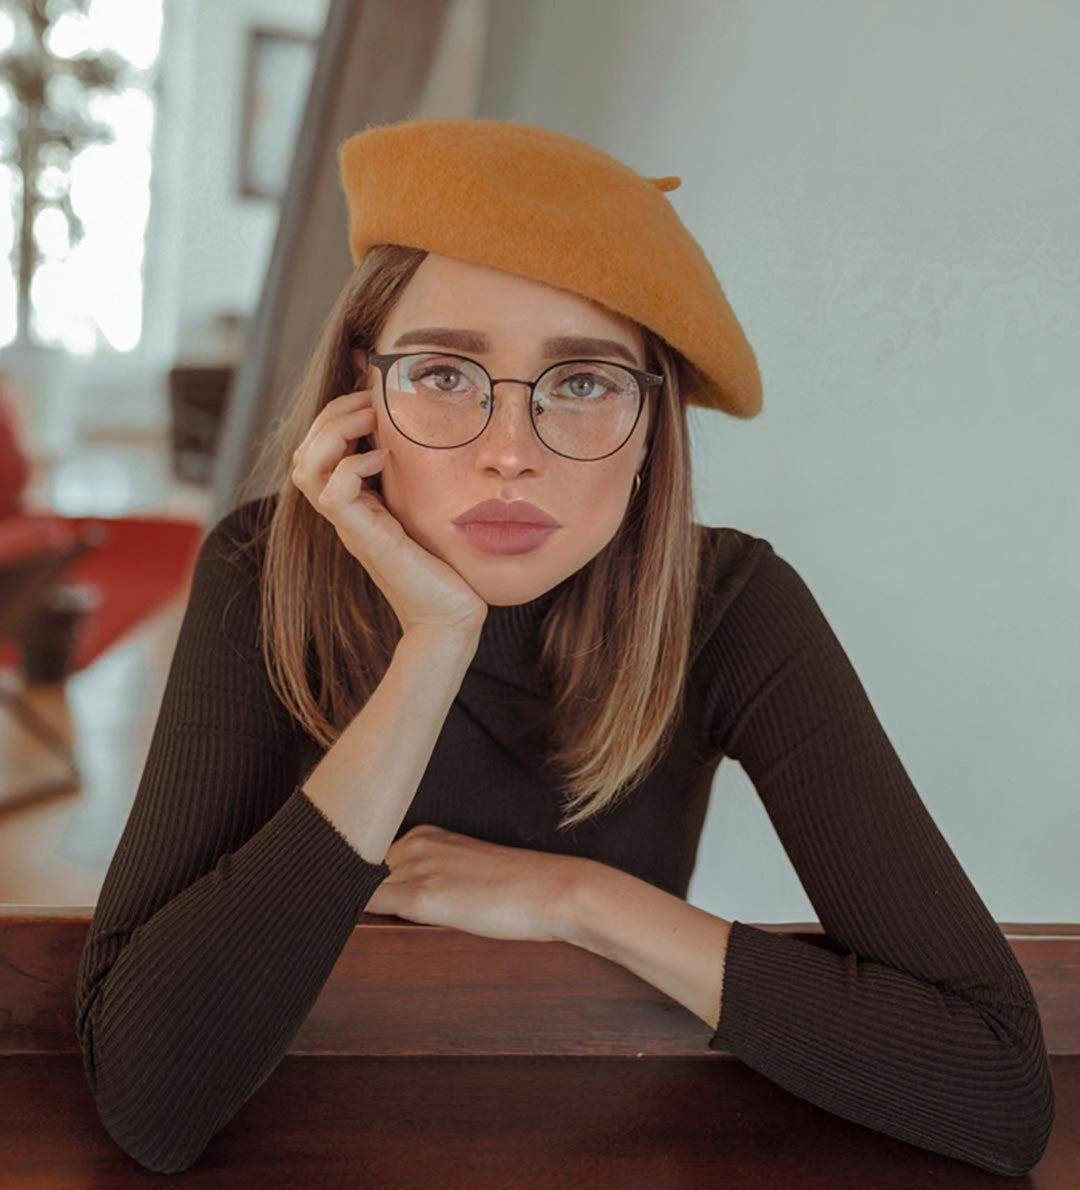 https://cdn.shopify.com/s/files/1/1045/8368/files/Woman-with-orange-beret-and-thin-eyeglasses-resting-her-head-in-one-hand.jpg?v=1643111097